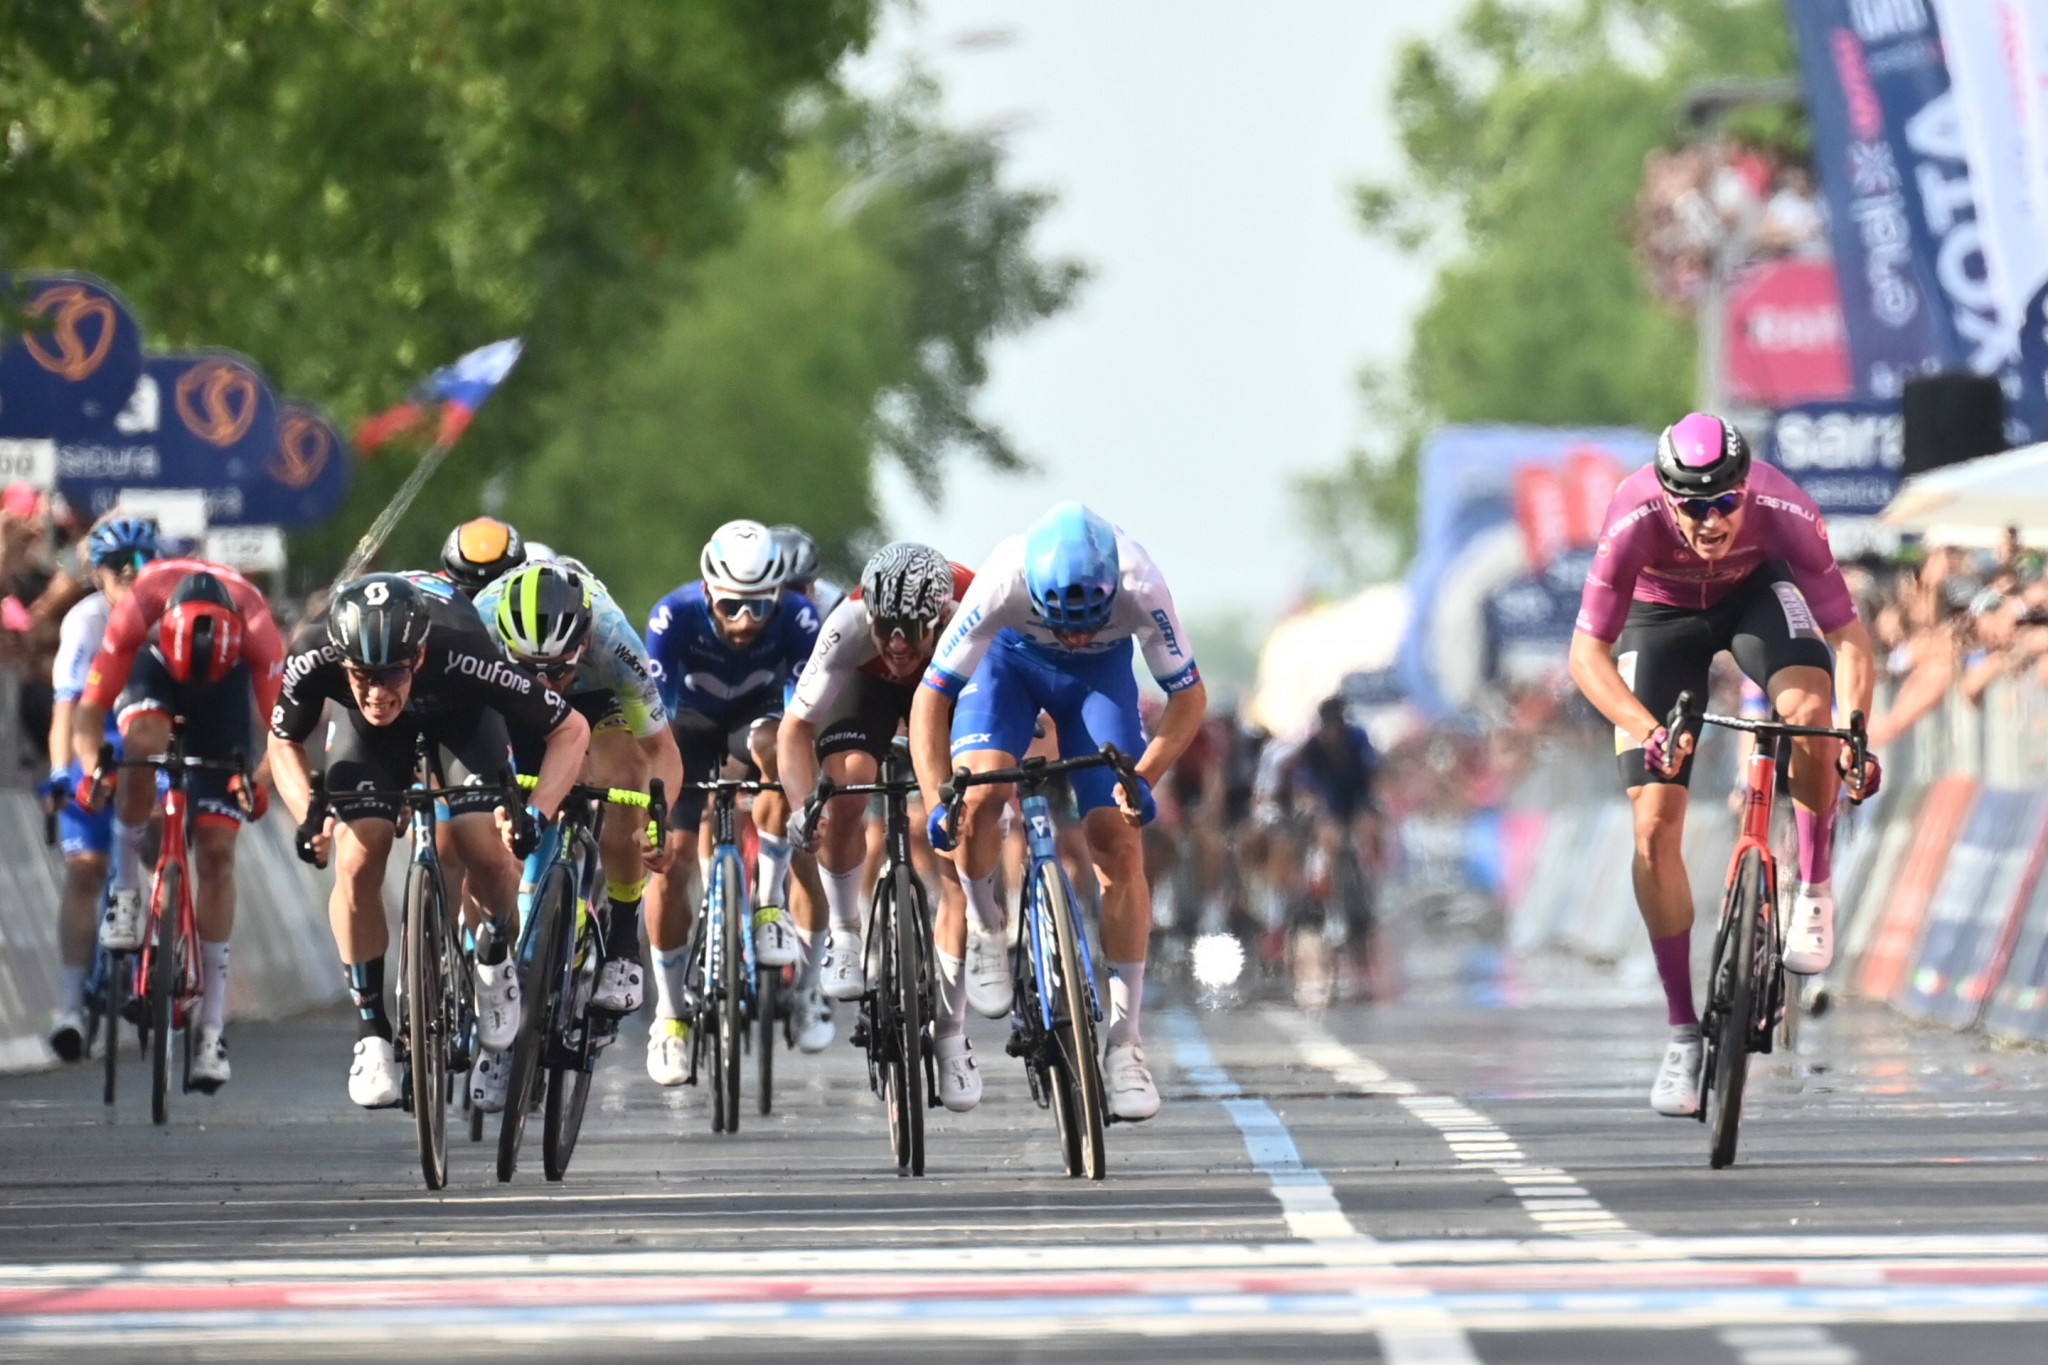 Dainese wins second Giro d’Italia stage after sprint victory, as Thomas retains race lead